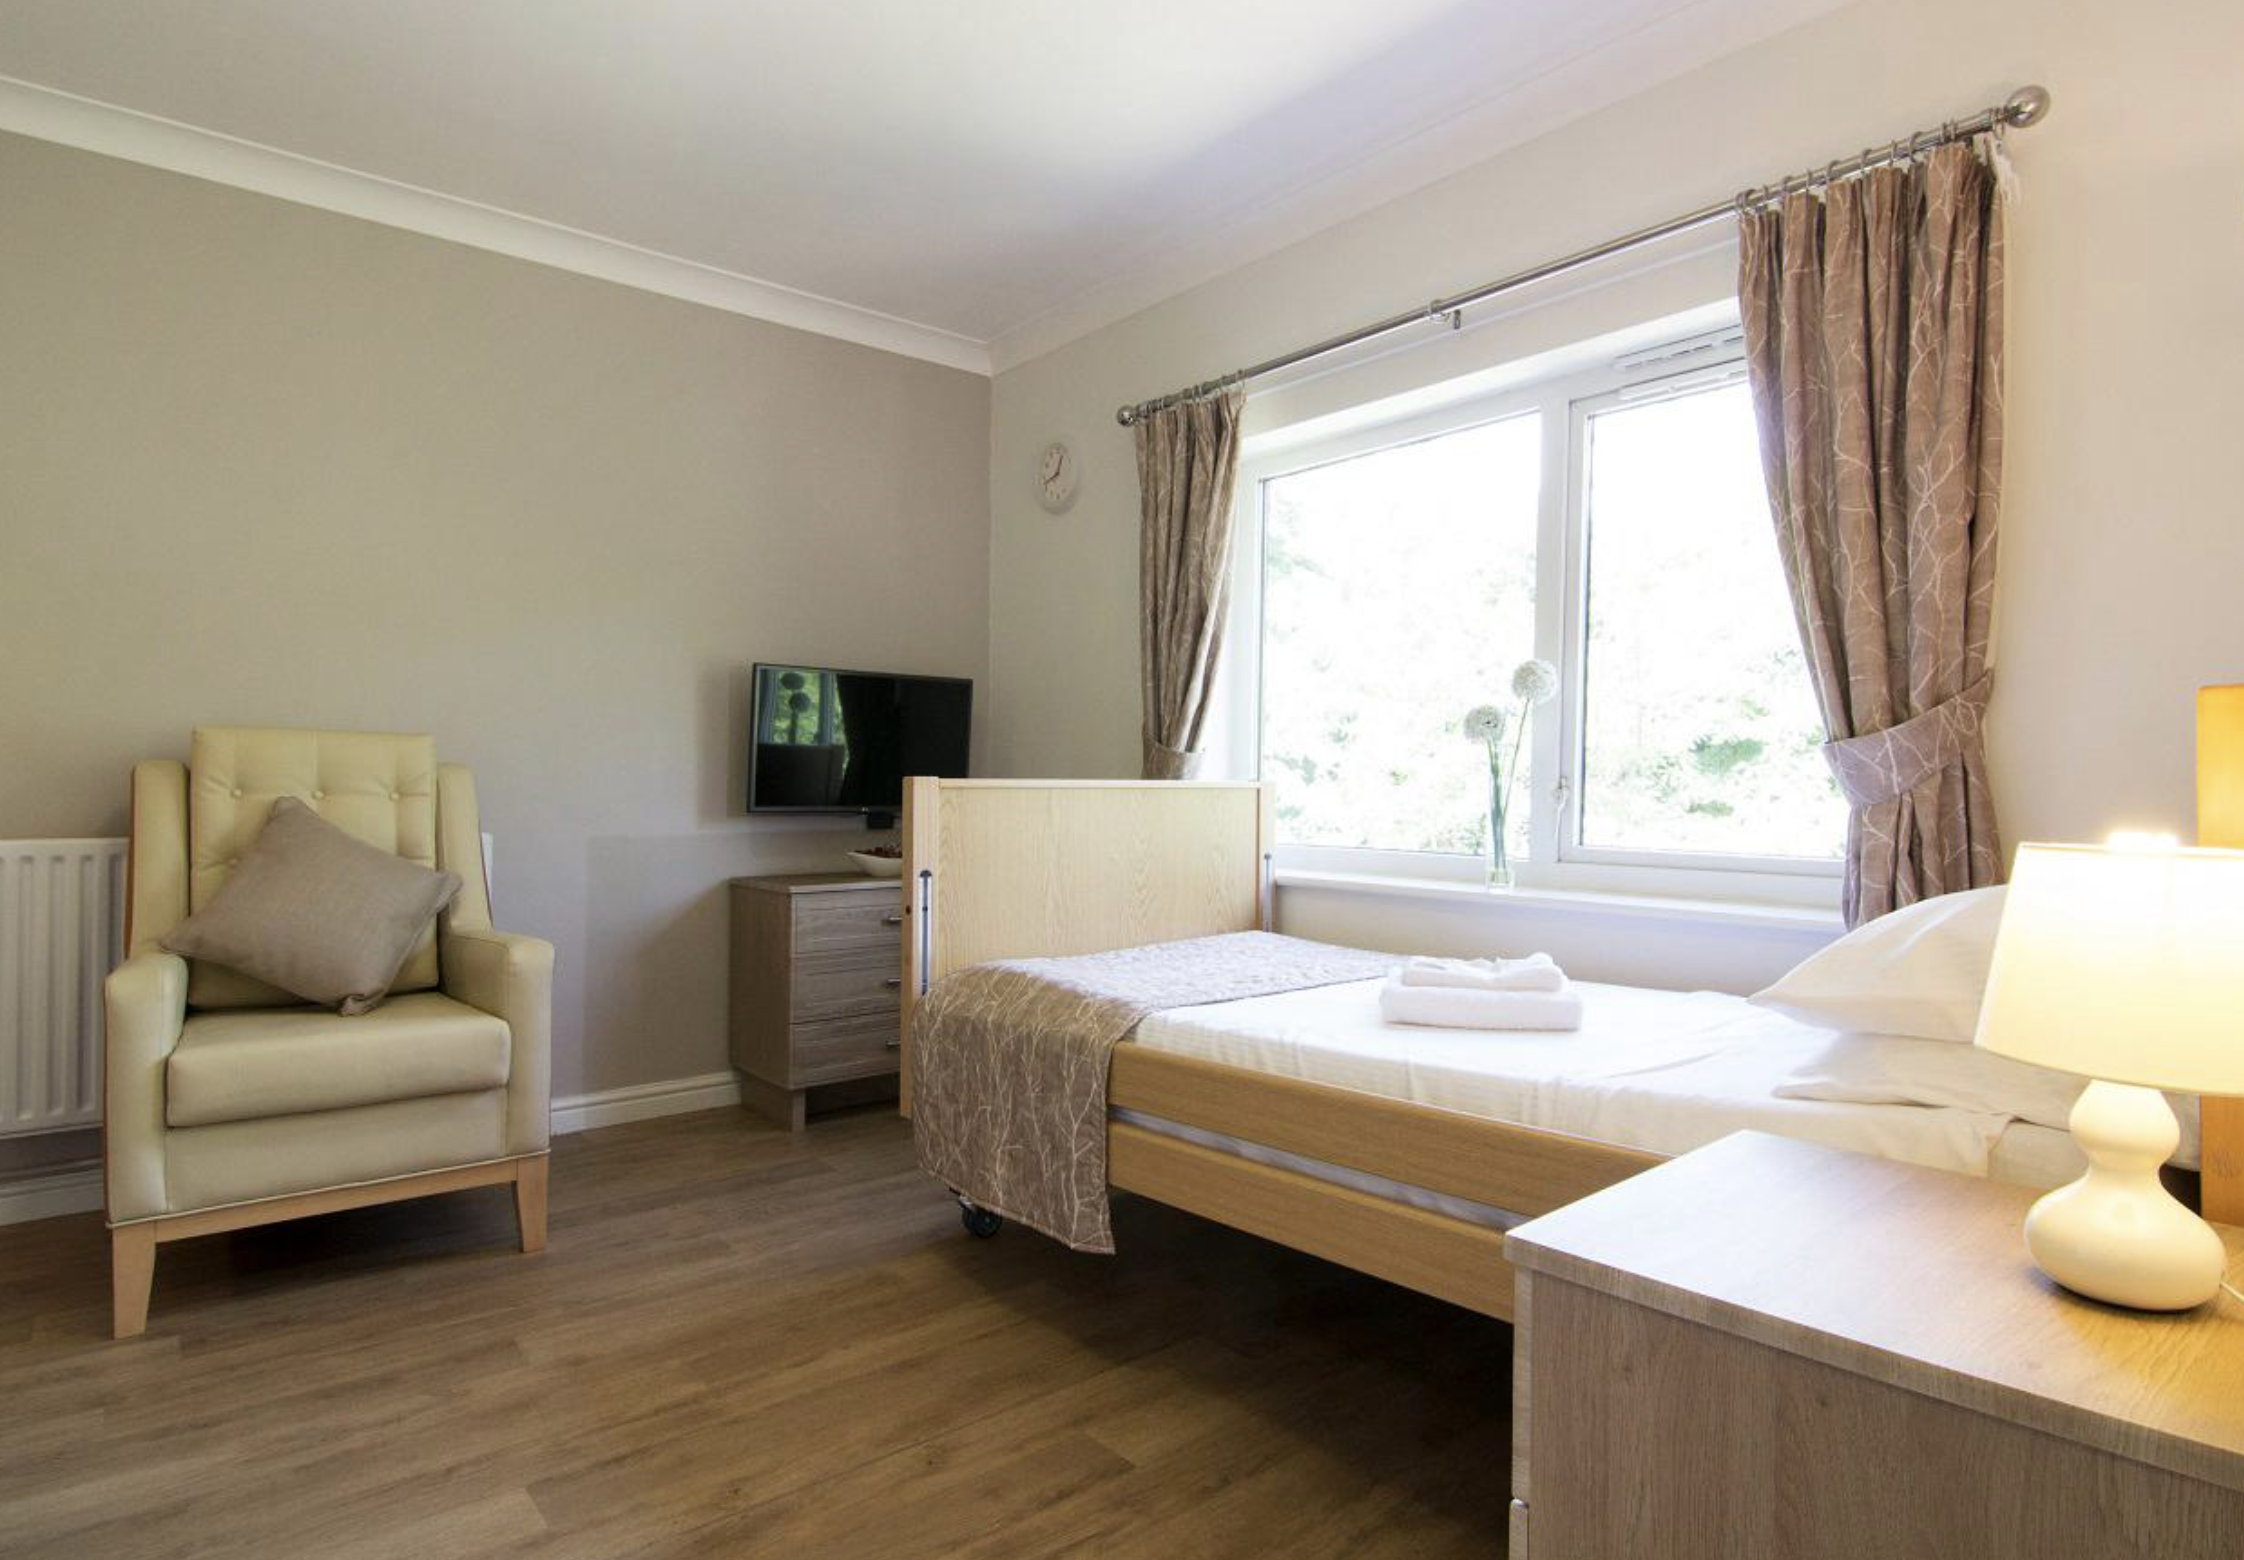 Bedroom of Abbotsleigh Mews care home in Sidcup, Greater London